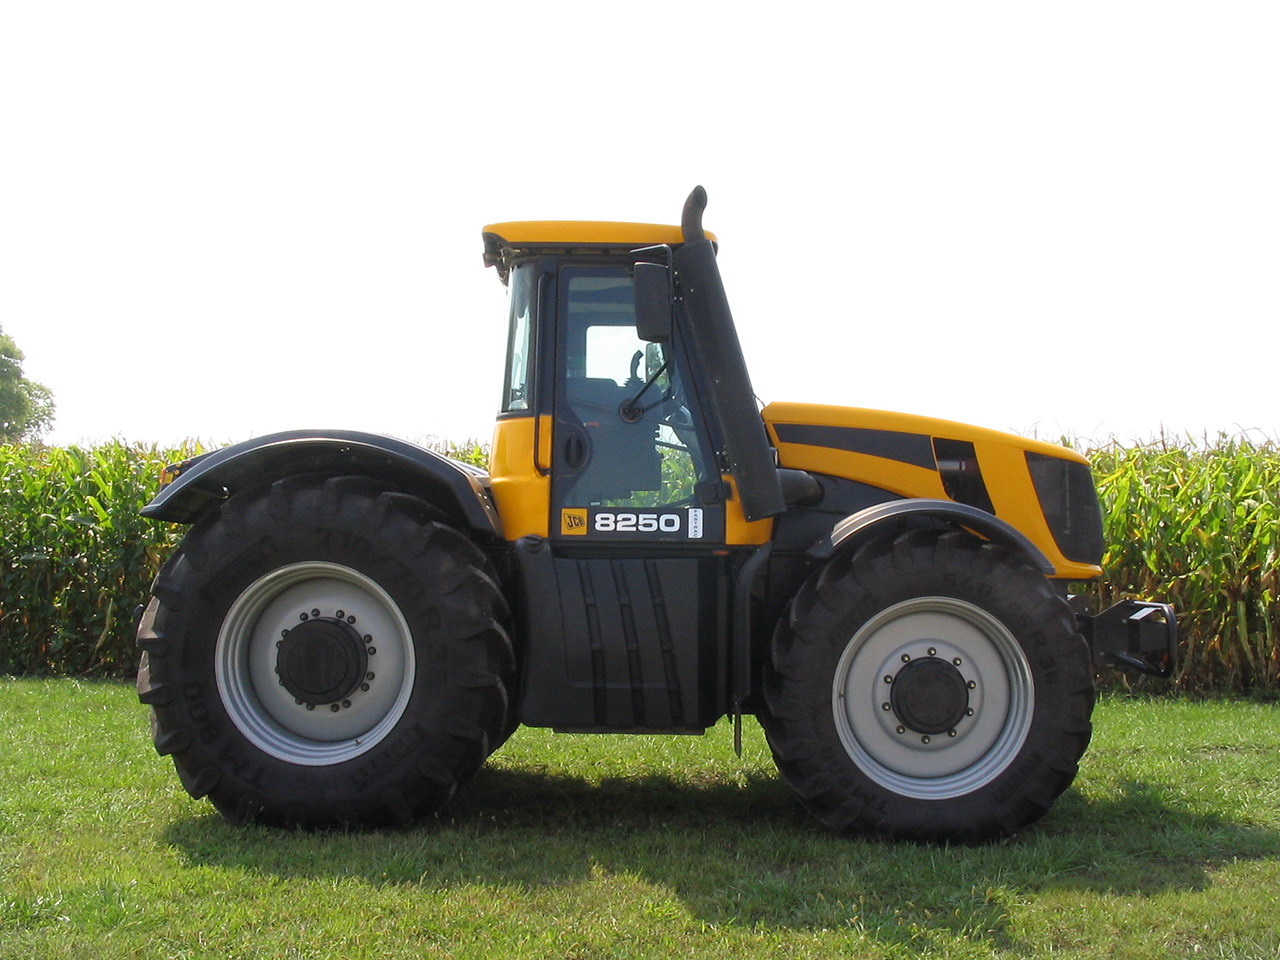 JCB Fastrac 8250 photos - PhotoGallery with 7 pics| CarsBase.com